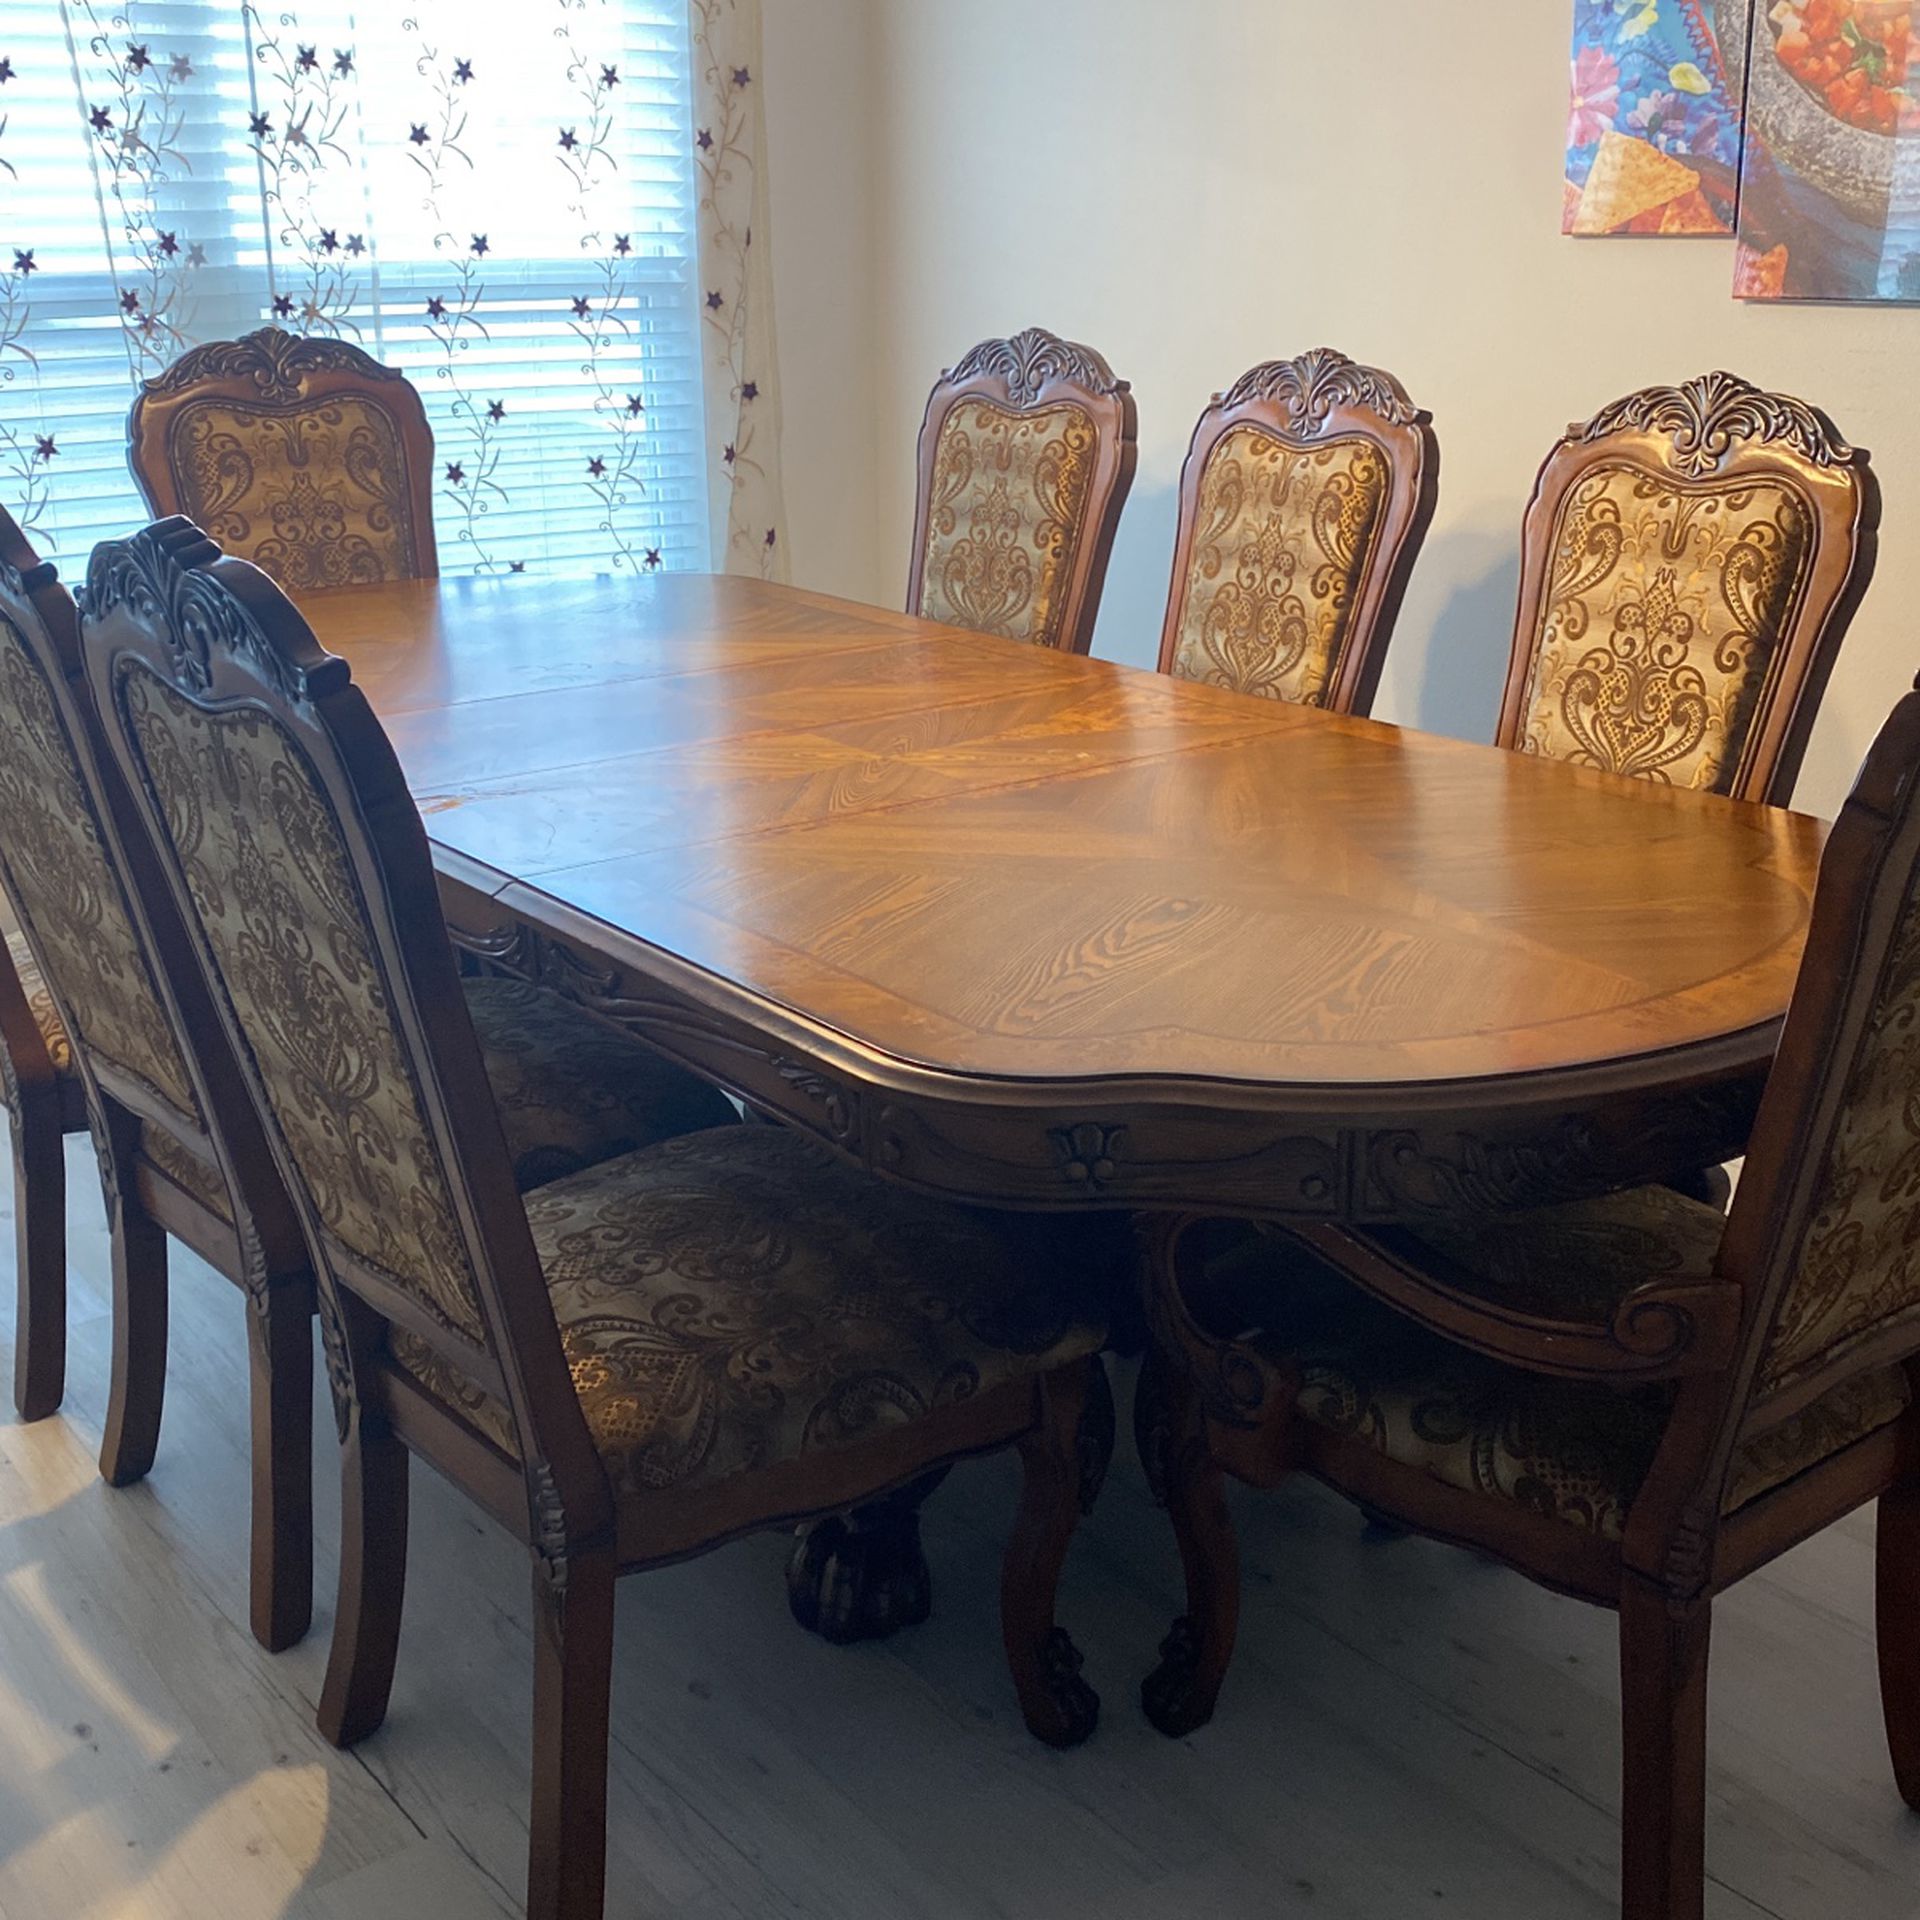 8 Chair Dining Table Set.